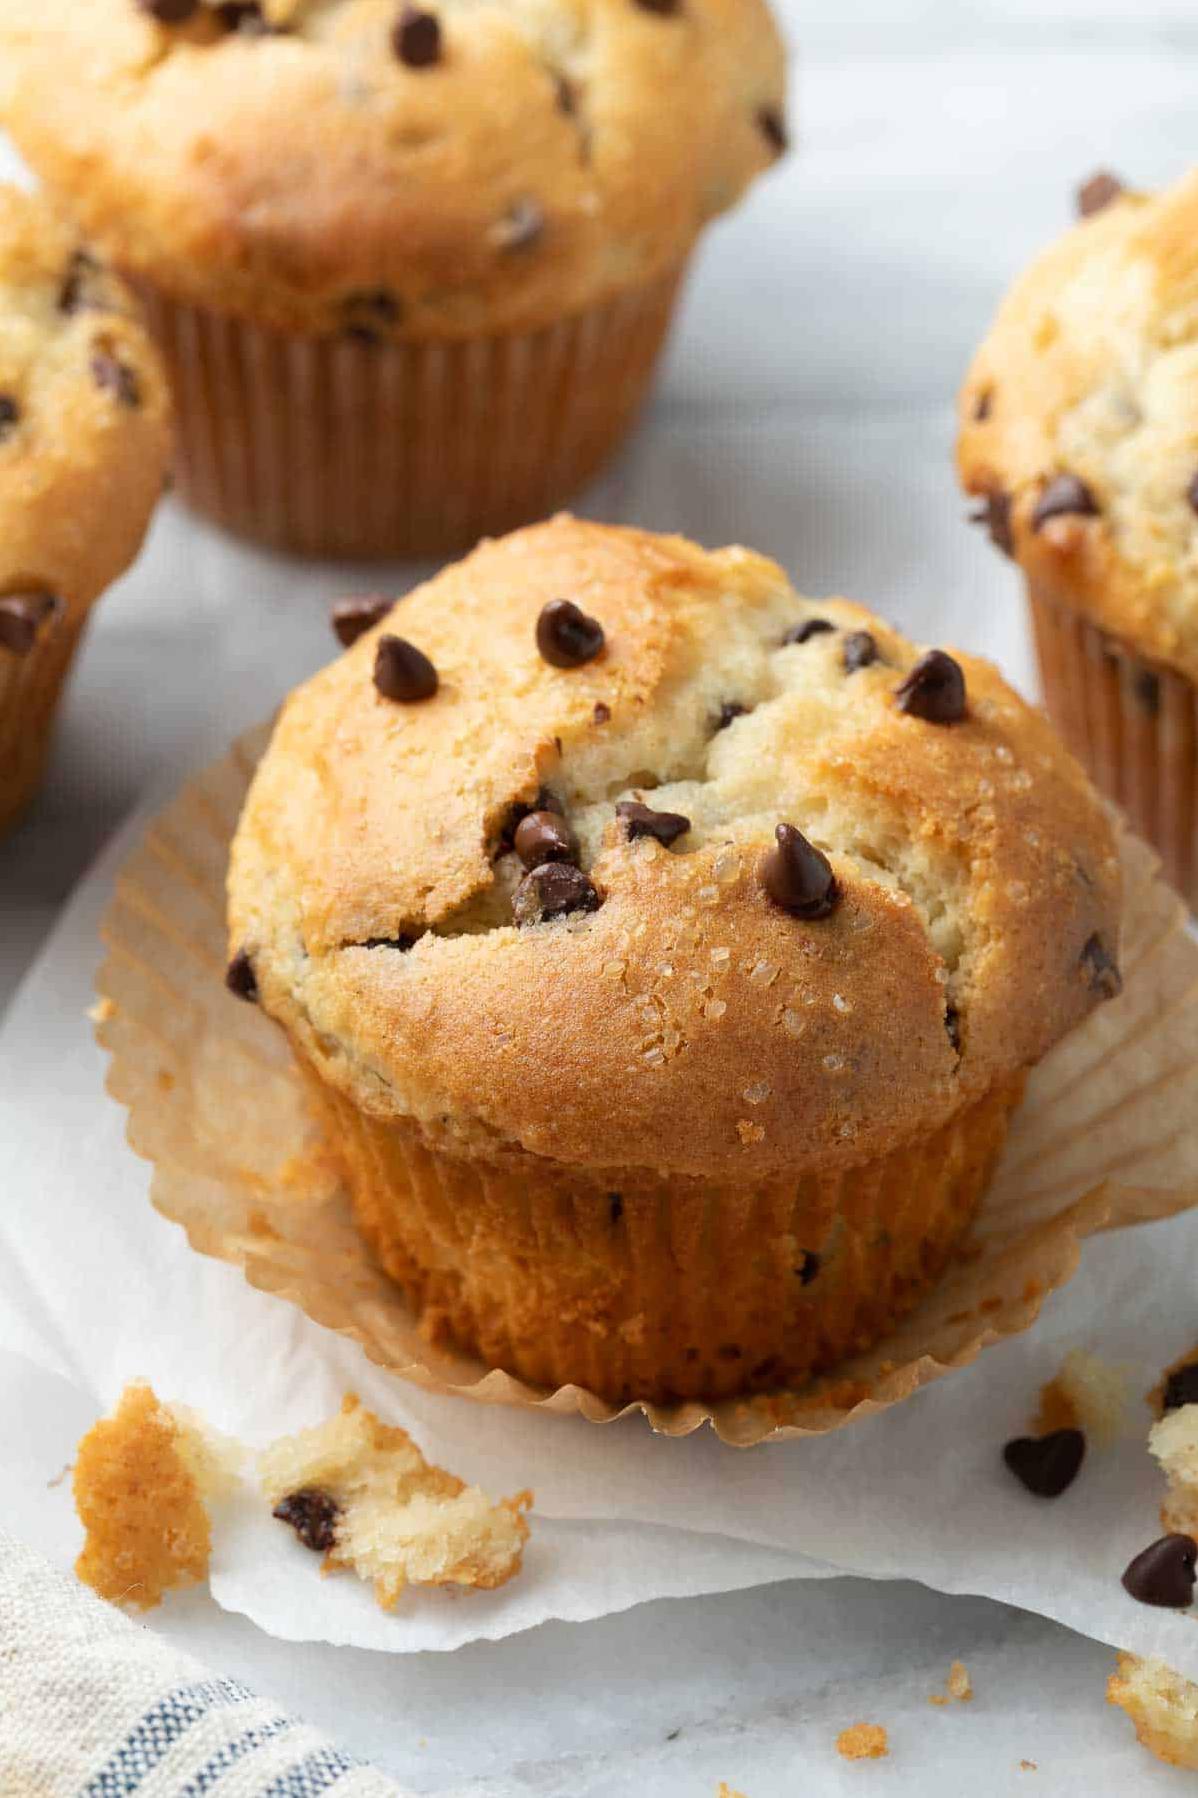  These gluten-free muffins are so delicious, no one will know they're made without wheat flour.